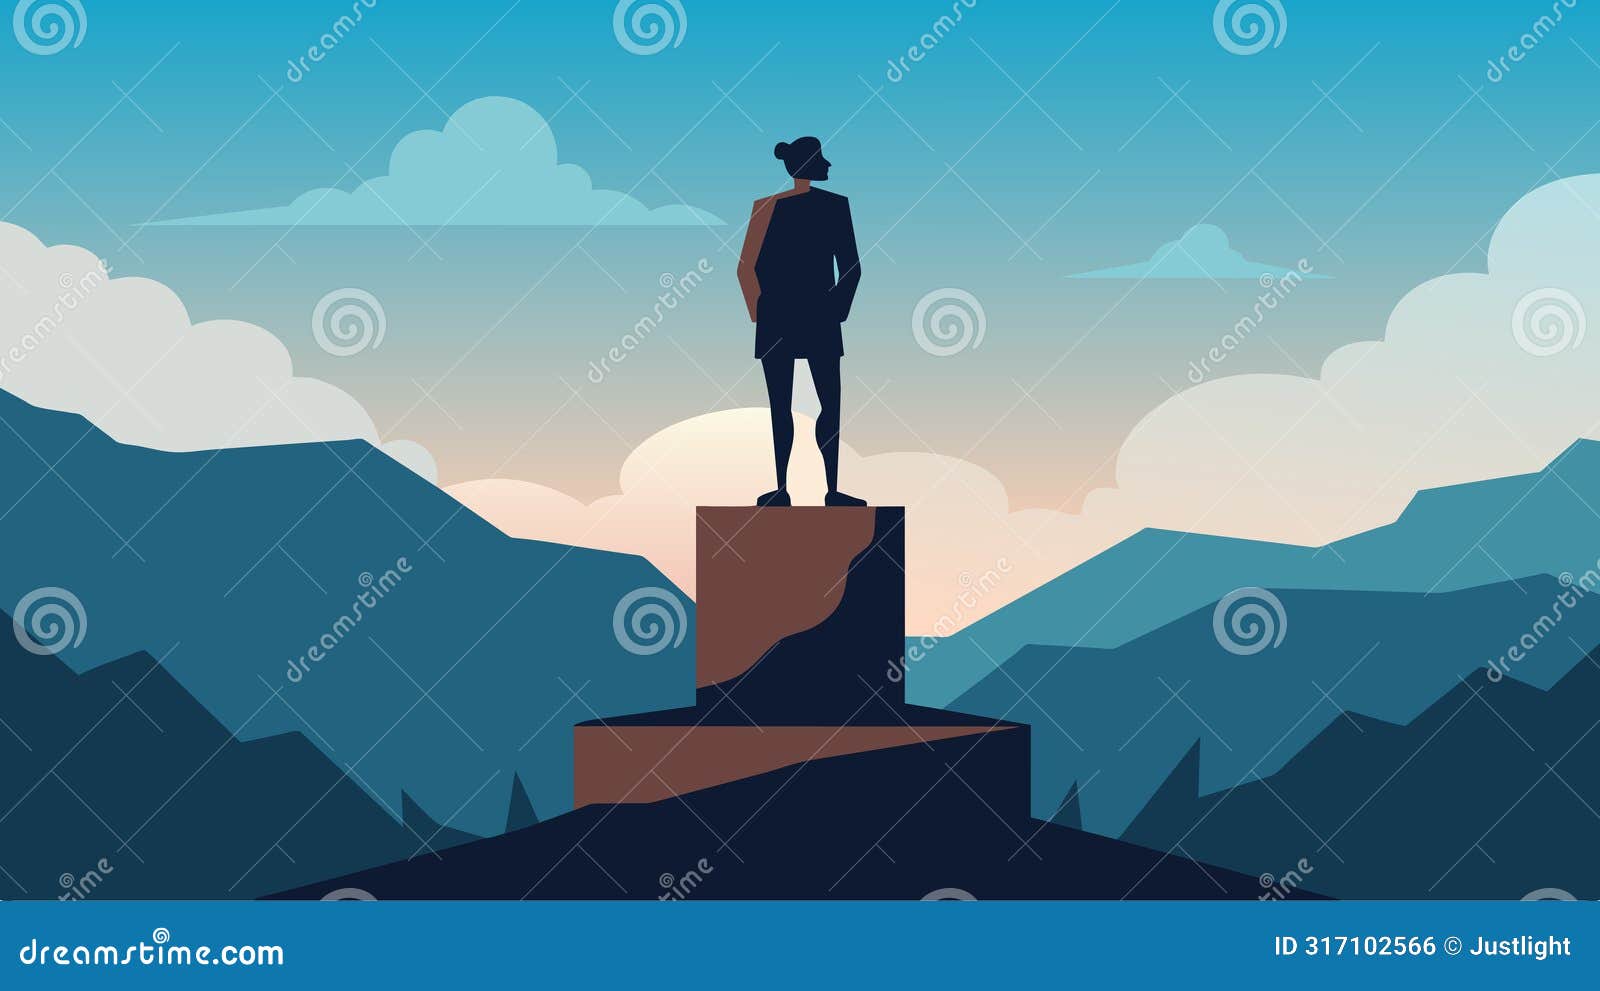 a silhouette of a person standing on a pedestal looking upwards towards the sky as they sculpt their own destiny